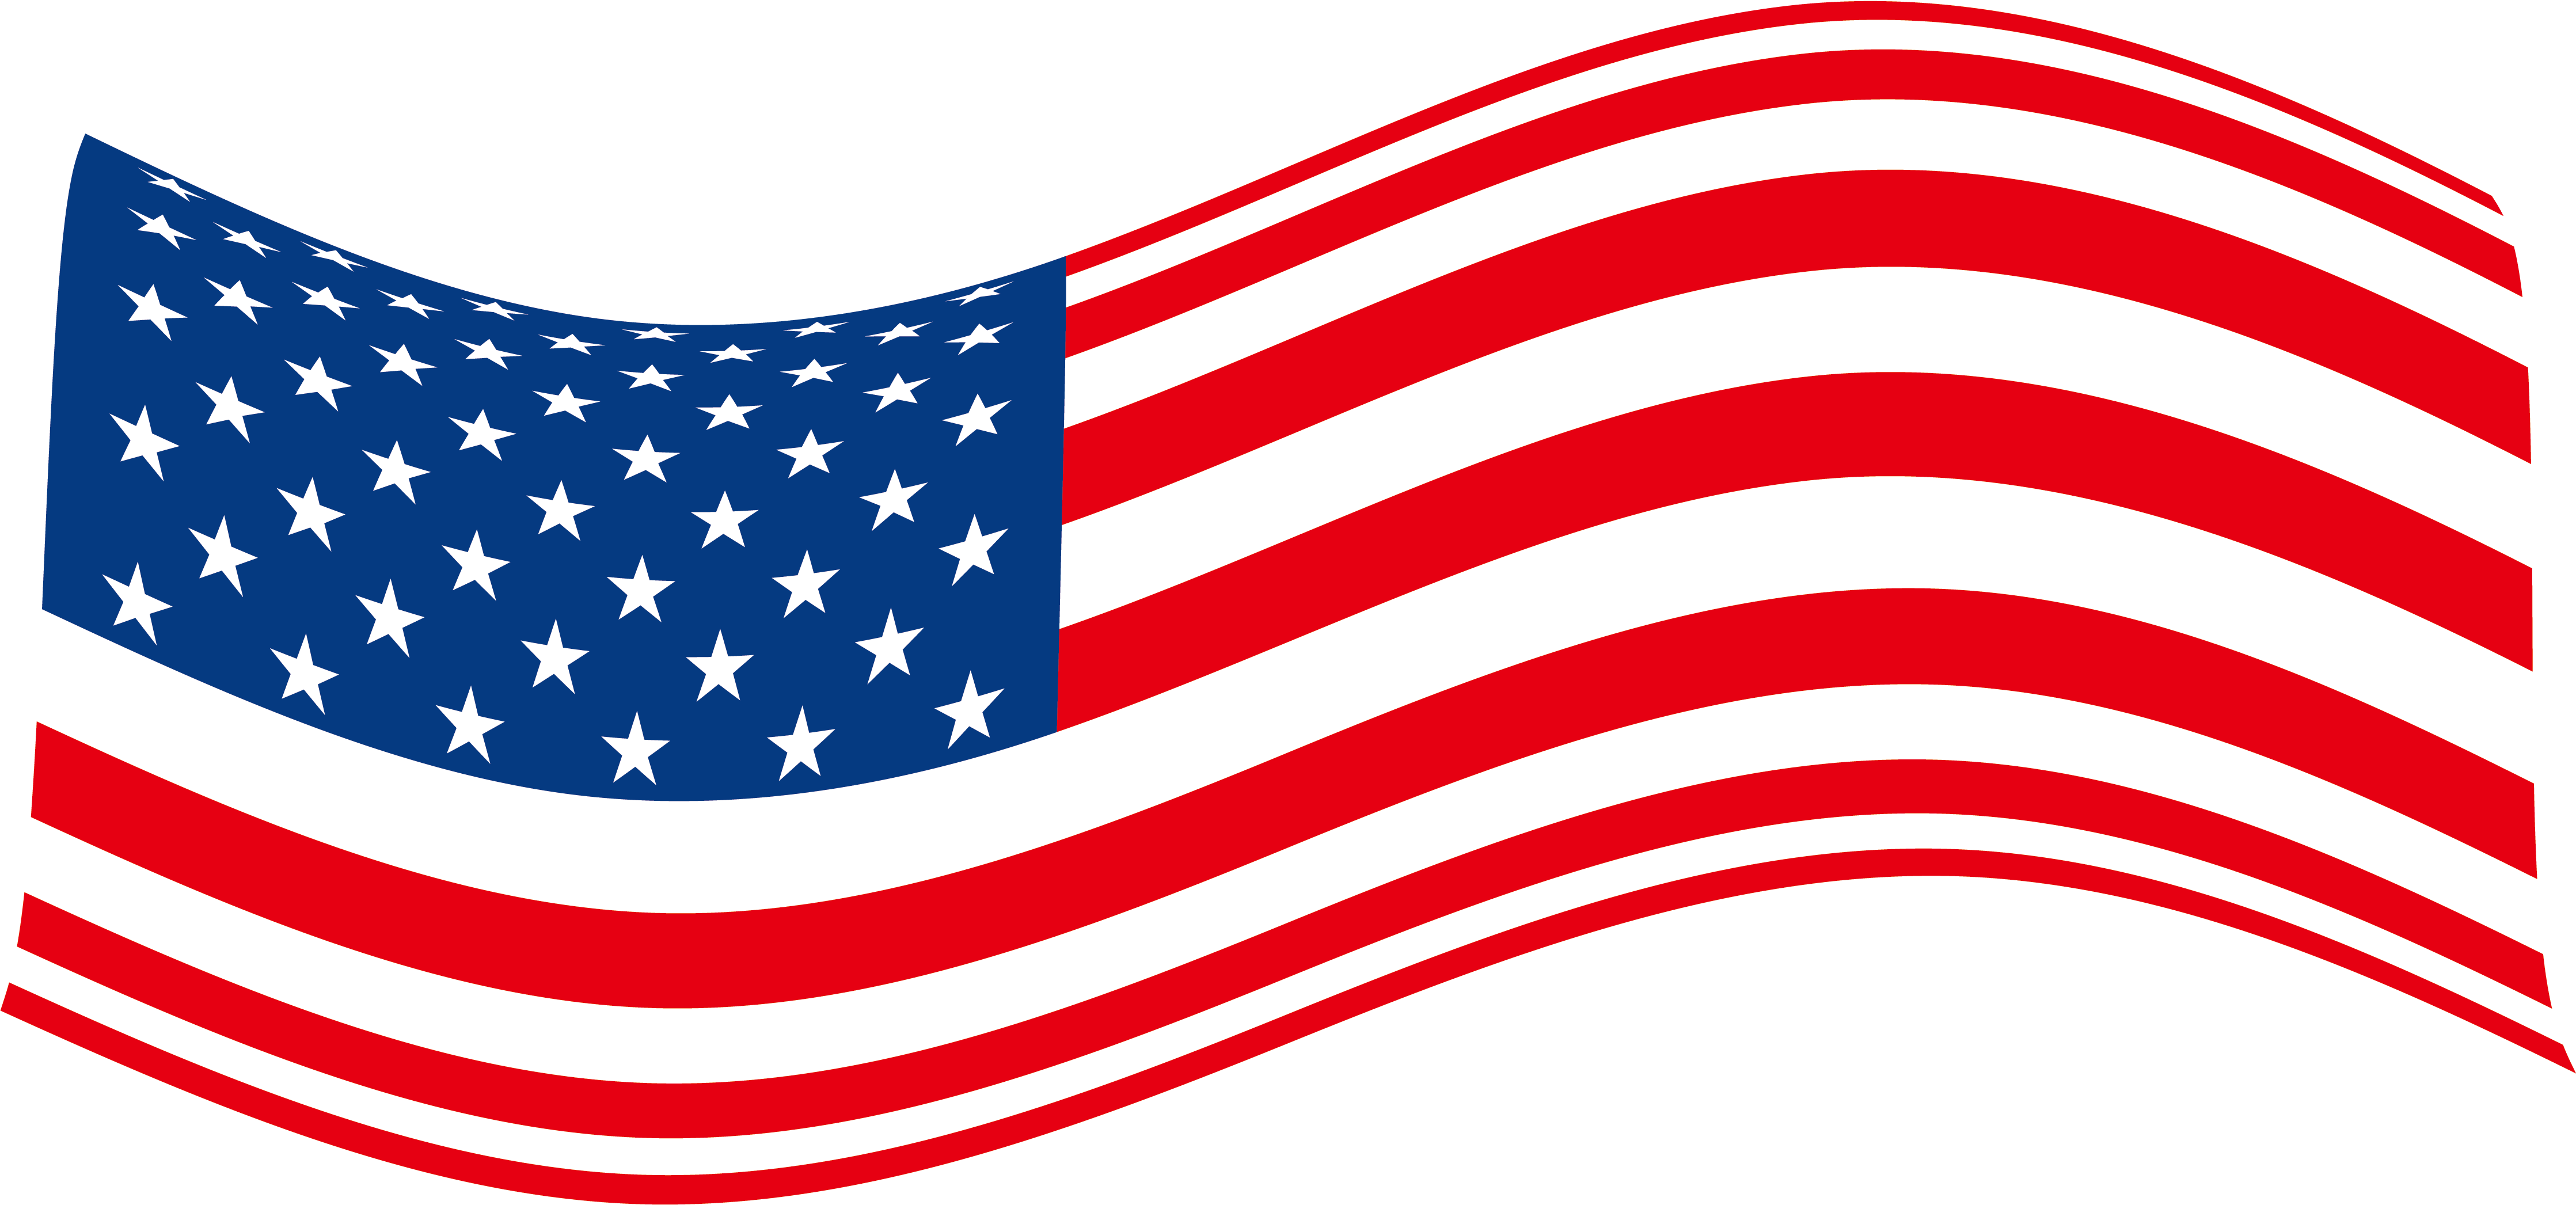 flags clipart veterans day